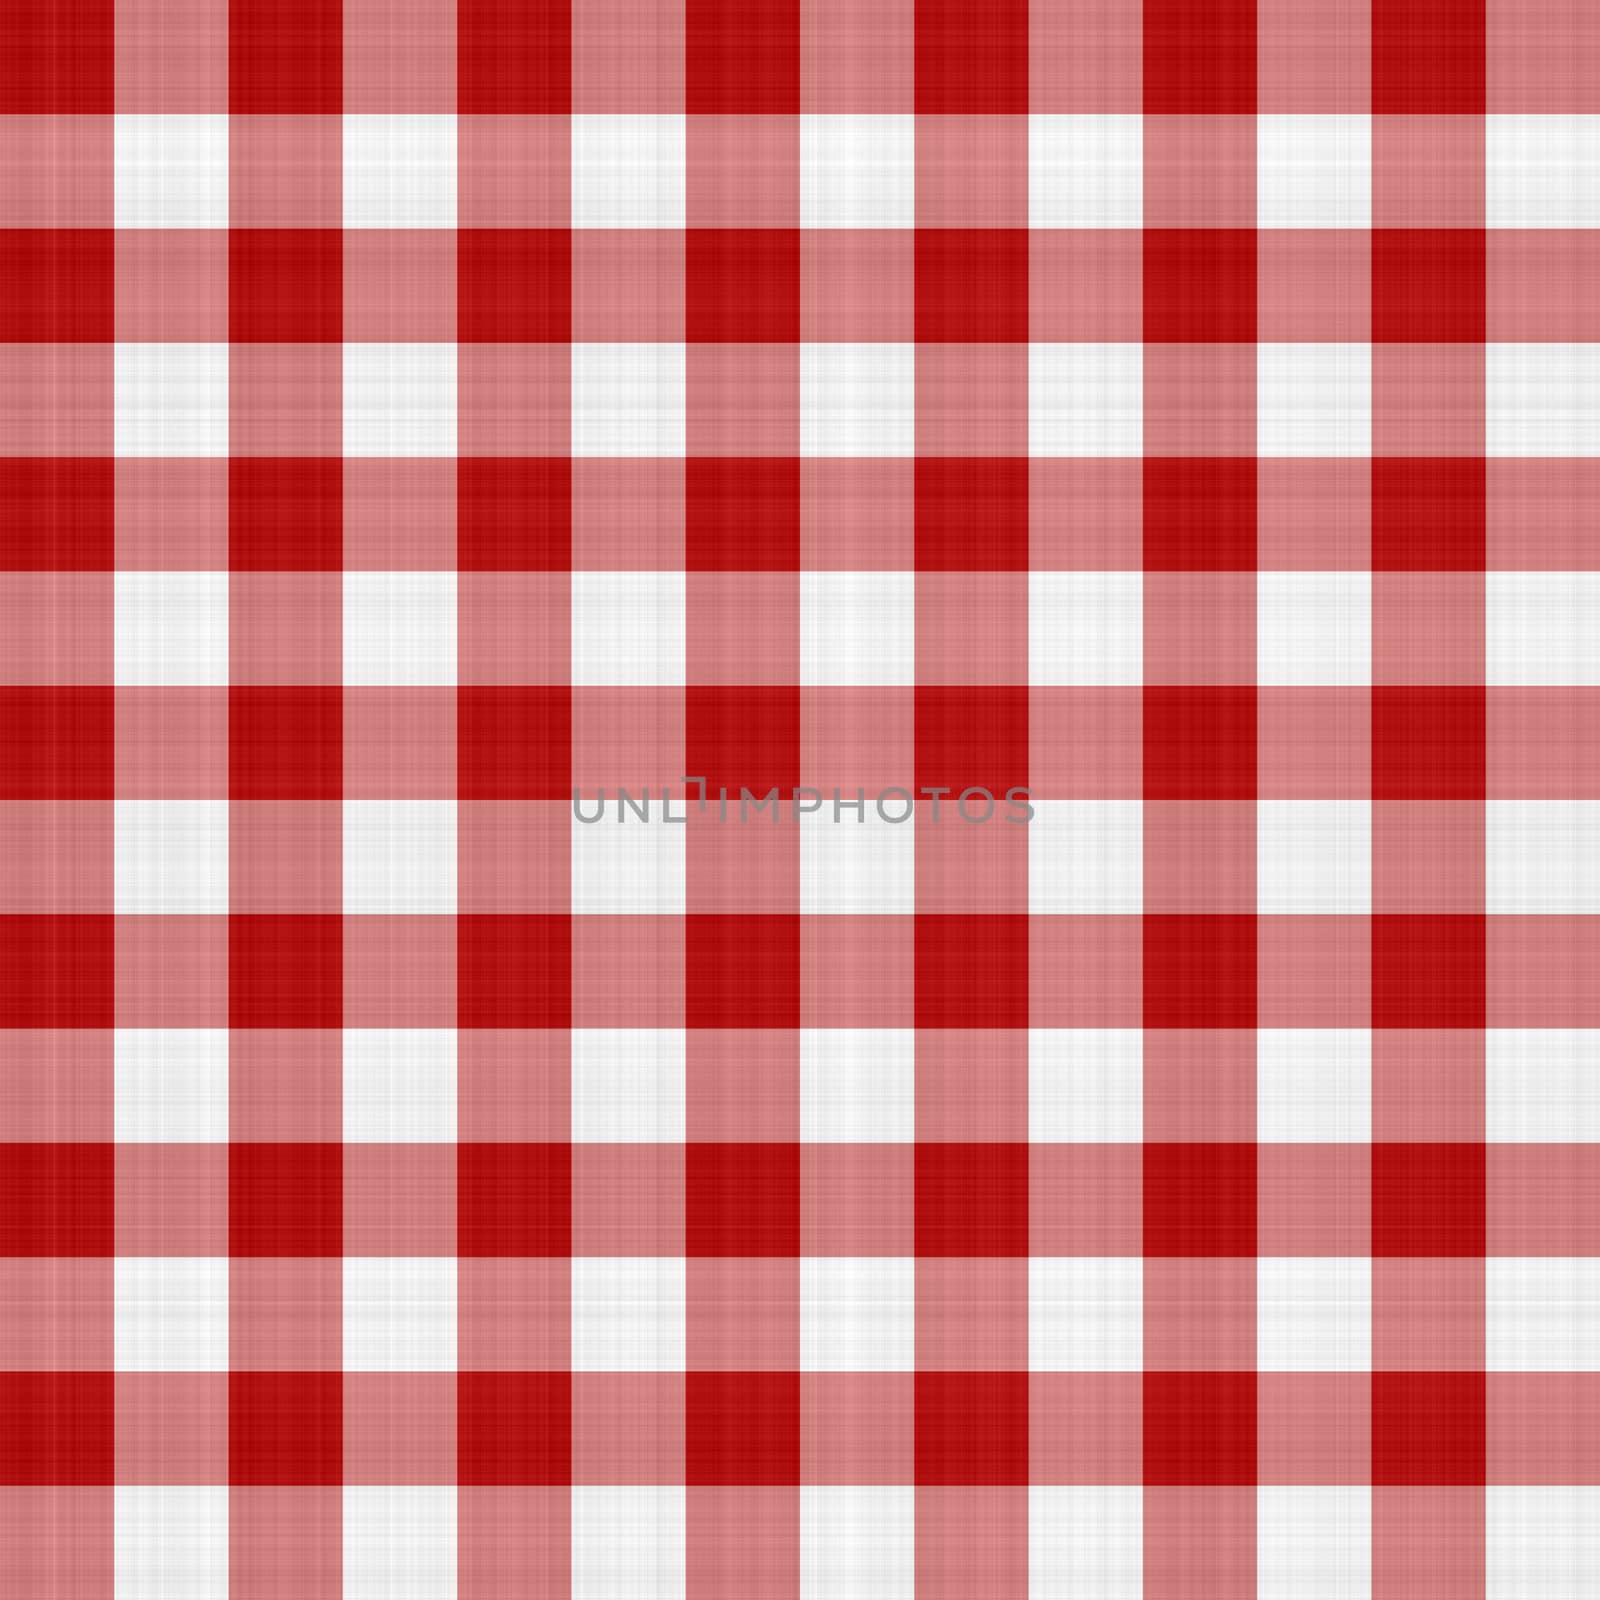 Red and white picnic table cloth pattern illustration that tiles seamlessly as a pattern.